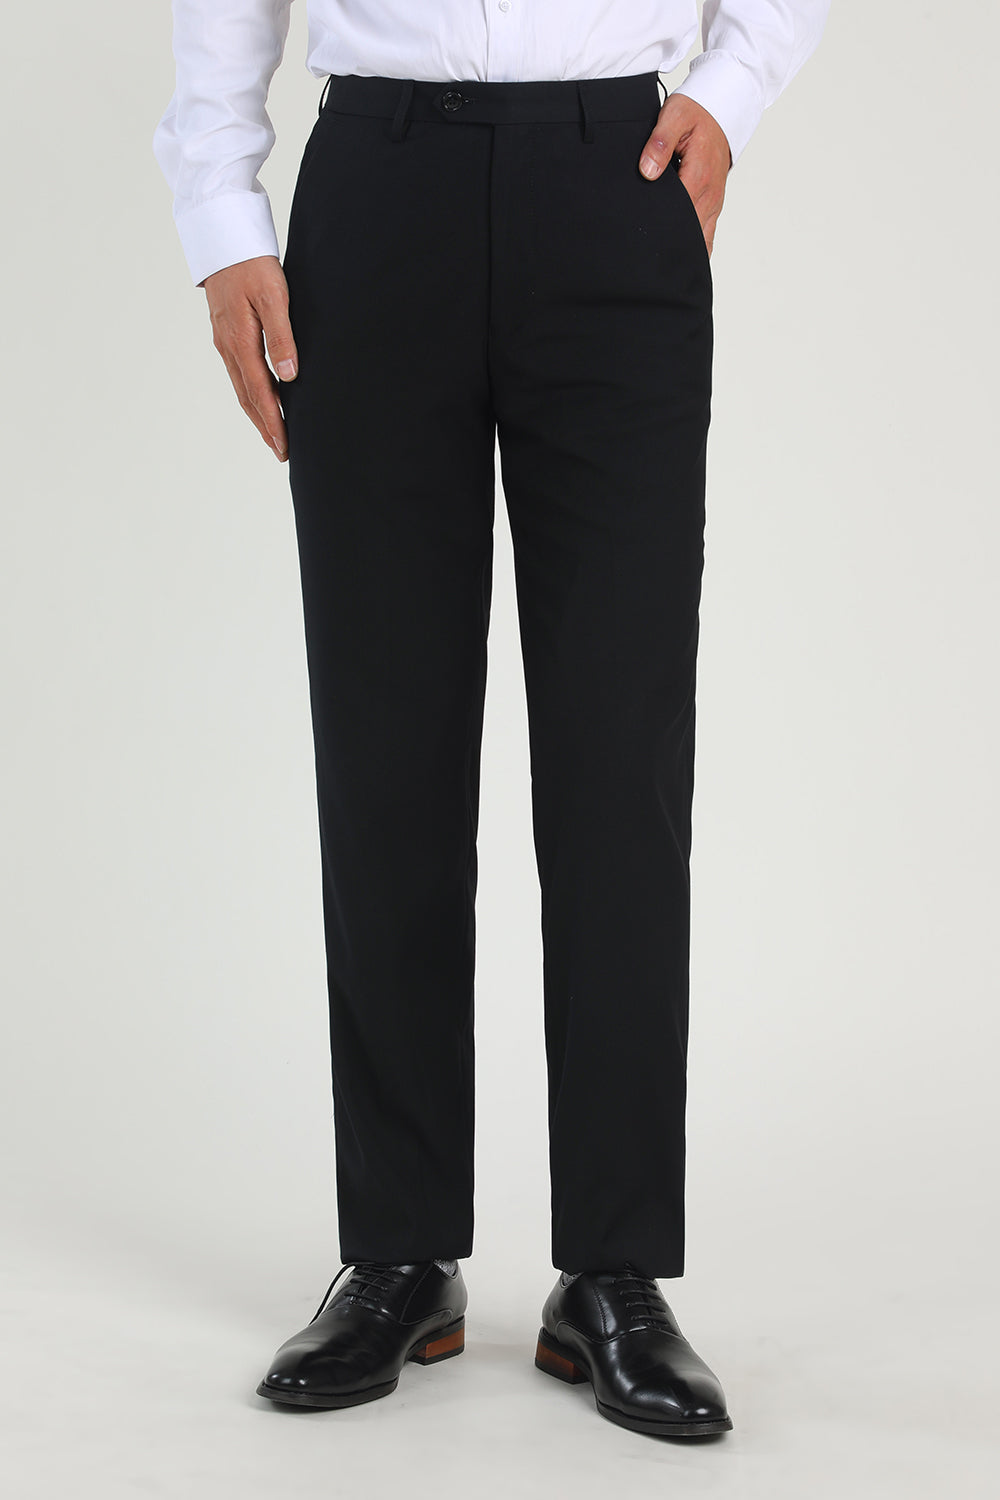 Navy High Waisted Suit Pants Mens for Wedding